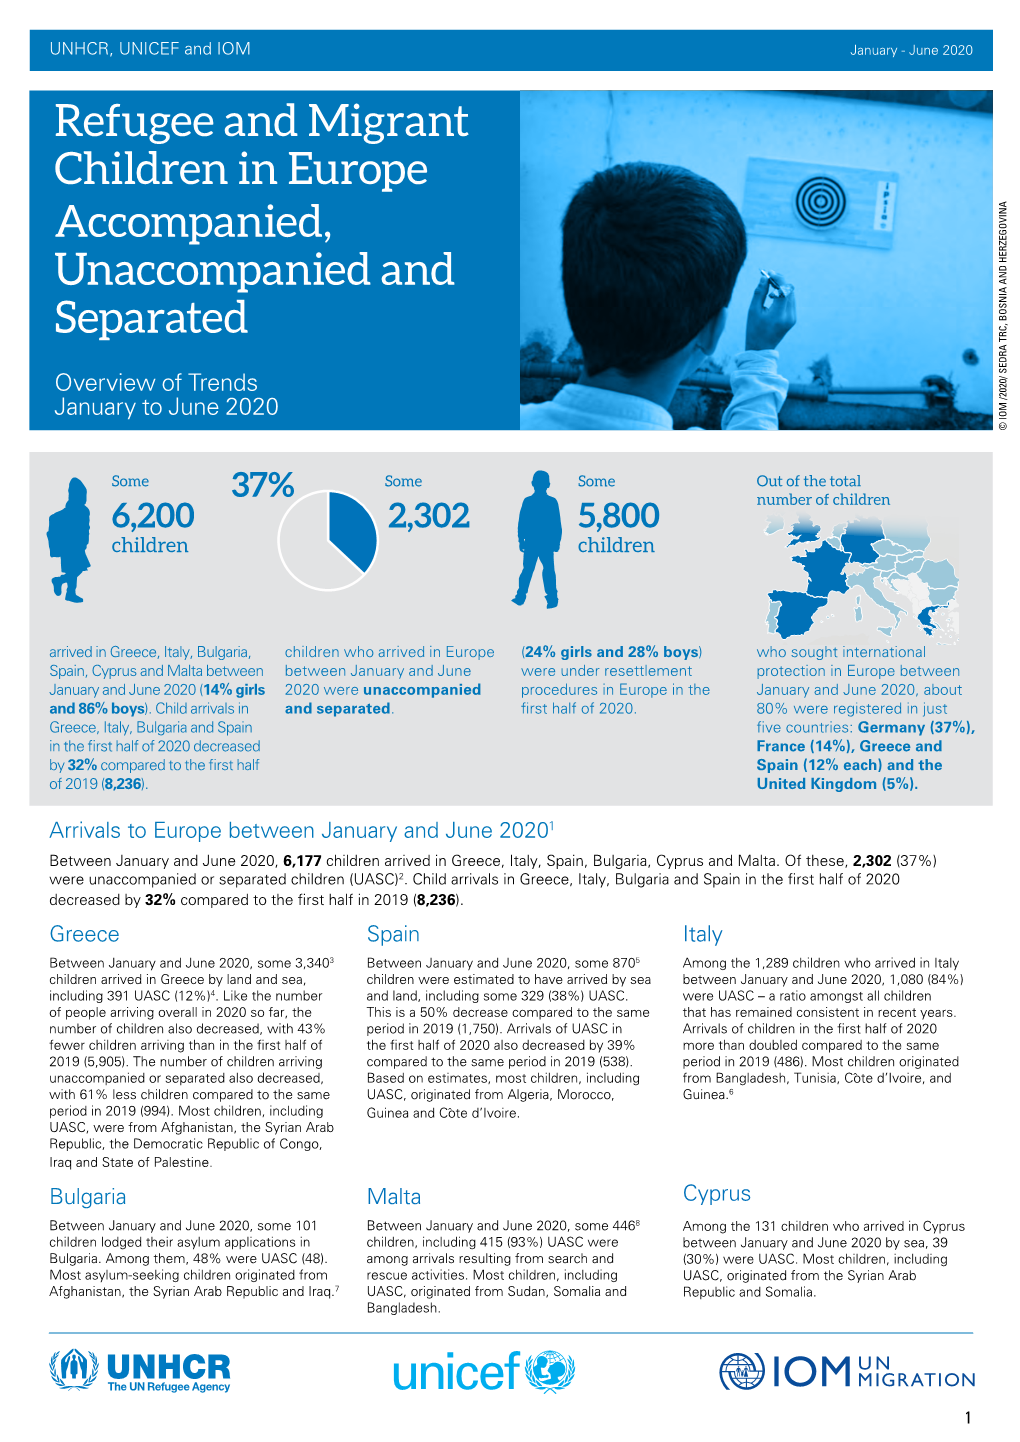 Refugee and Migrant Children in Europe Accompanied, Unaccompanied and Separated